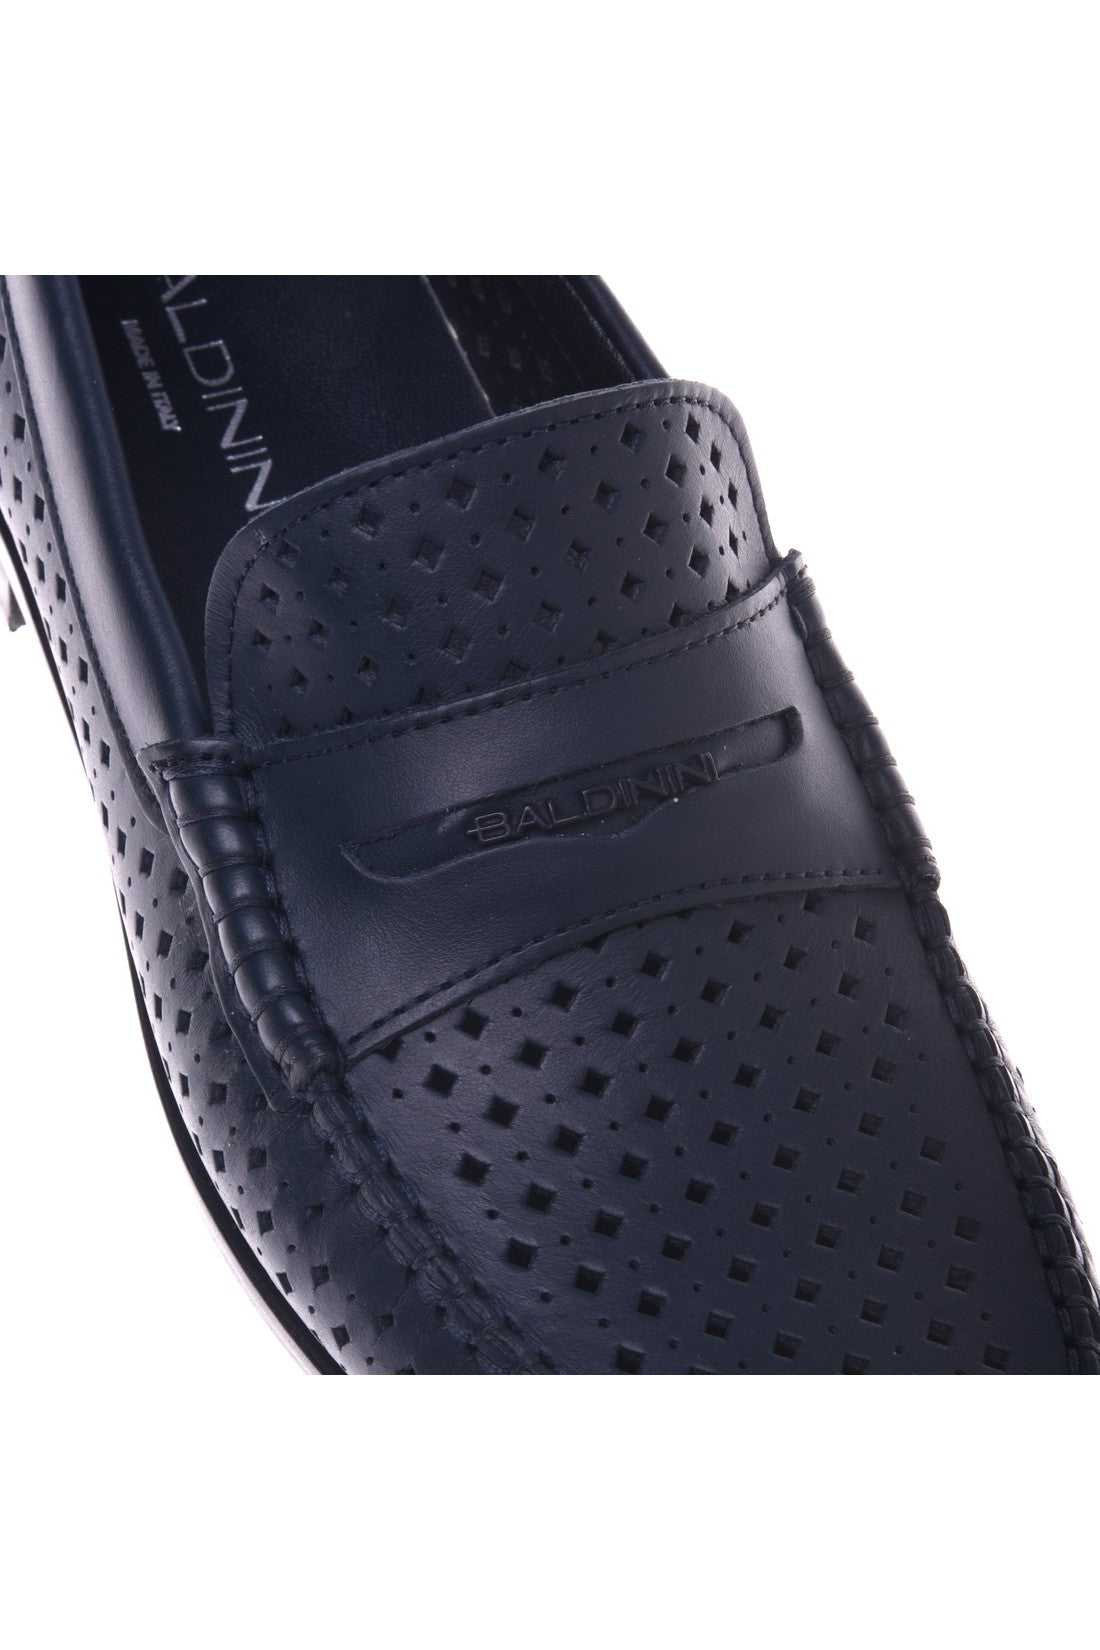 Loafer in blue perforated calfskin